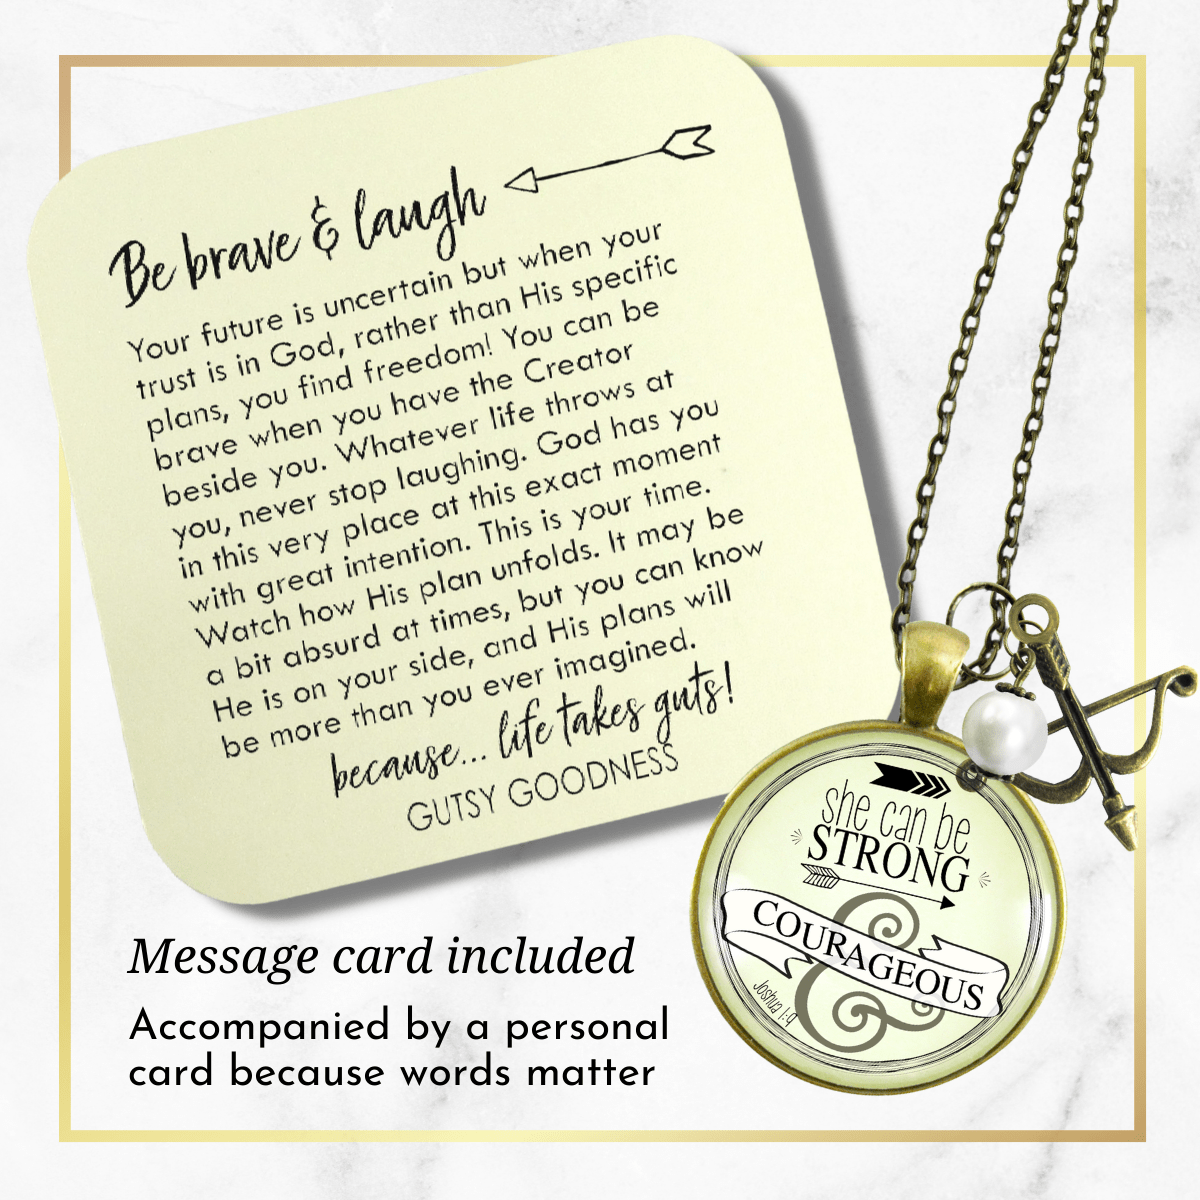 Gutsy Goodness She Can Be Strong Courageous Necklace Brave Life Quote Bow Arrow - Gutsy Goodness Handmade Jewelry;She Can Be Strong And Courageous - Gutsy Goodness Handmade Jewelry Gifts